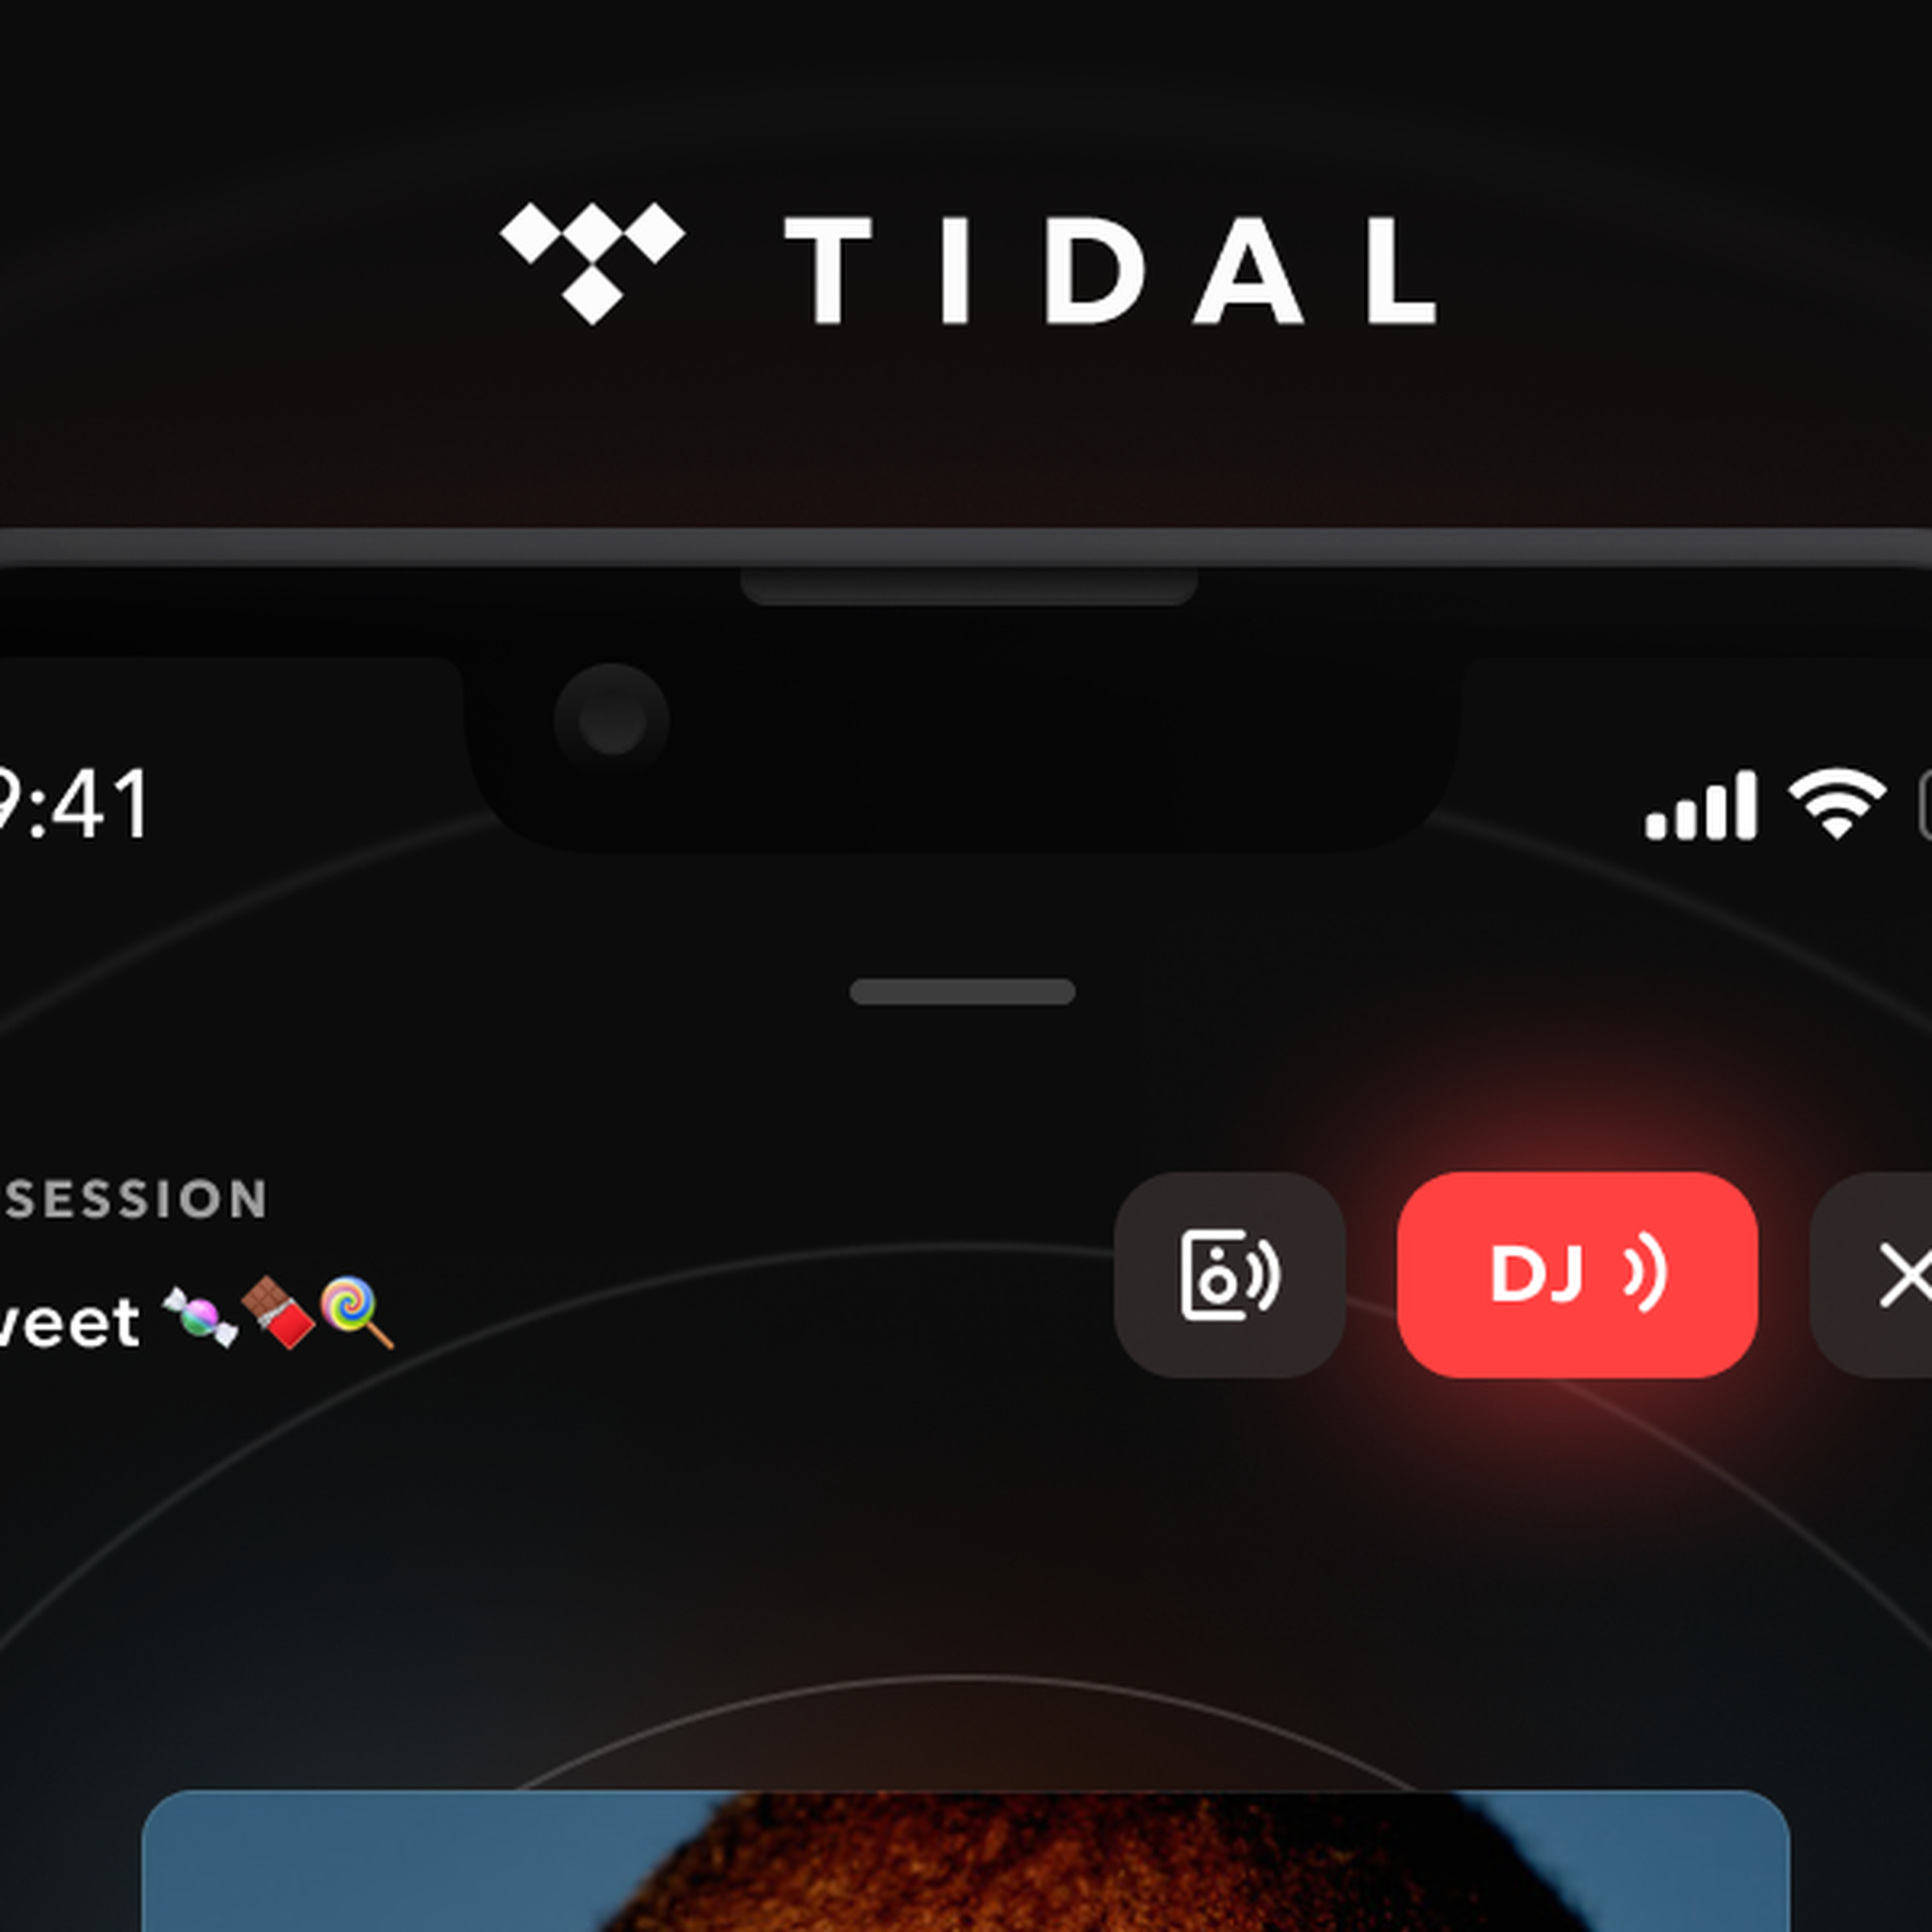 The tidal logo is situated above the top third of an iPhone screen with the Tidal app that says “DJ Session” with a playlist called “sweet” and a red DJ icon on the right next to the AirPlay/wireless connect button.